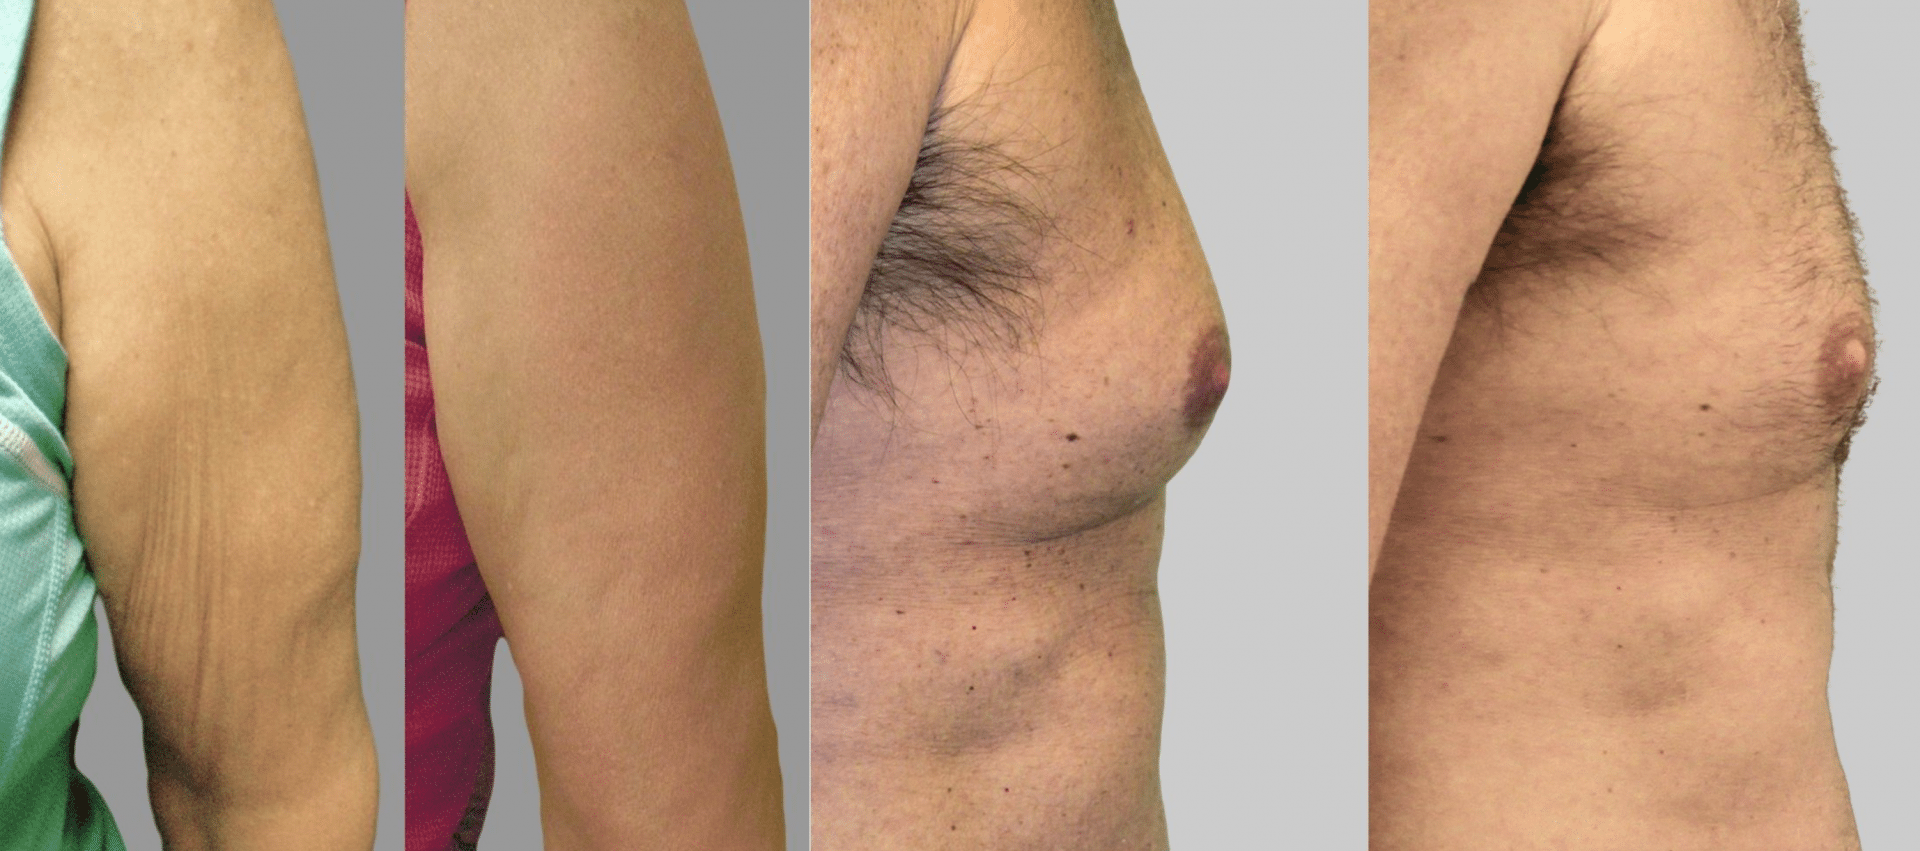 Exilis Ultra before and after photo